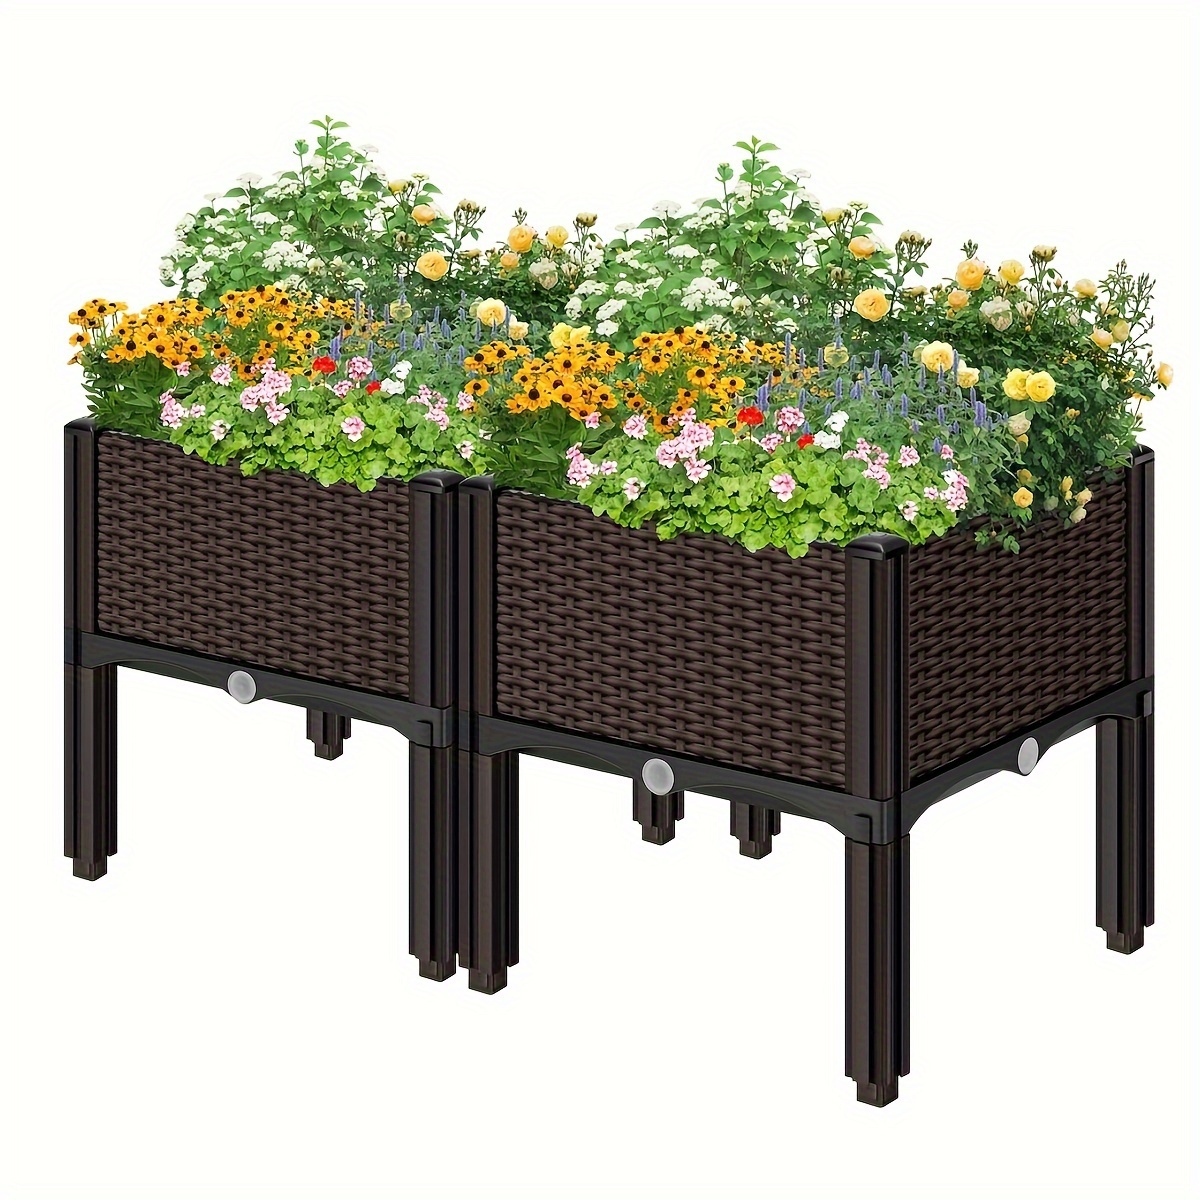 

Elevated Plastic Garden Planter Kit - Raised Outdoor Flower & Vegetable Stand With Drainage Holes For Patio, Deck, Porch